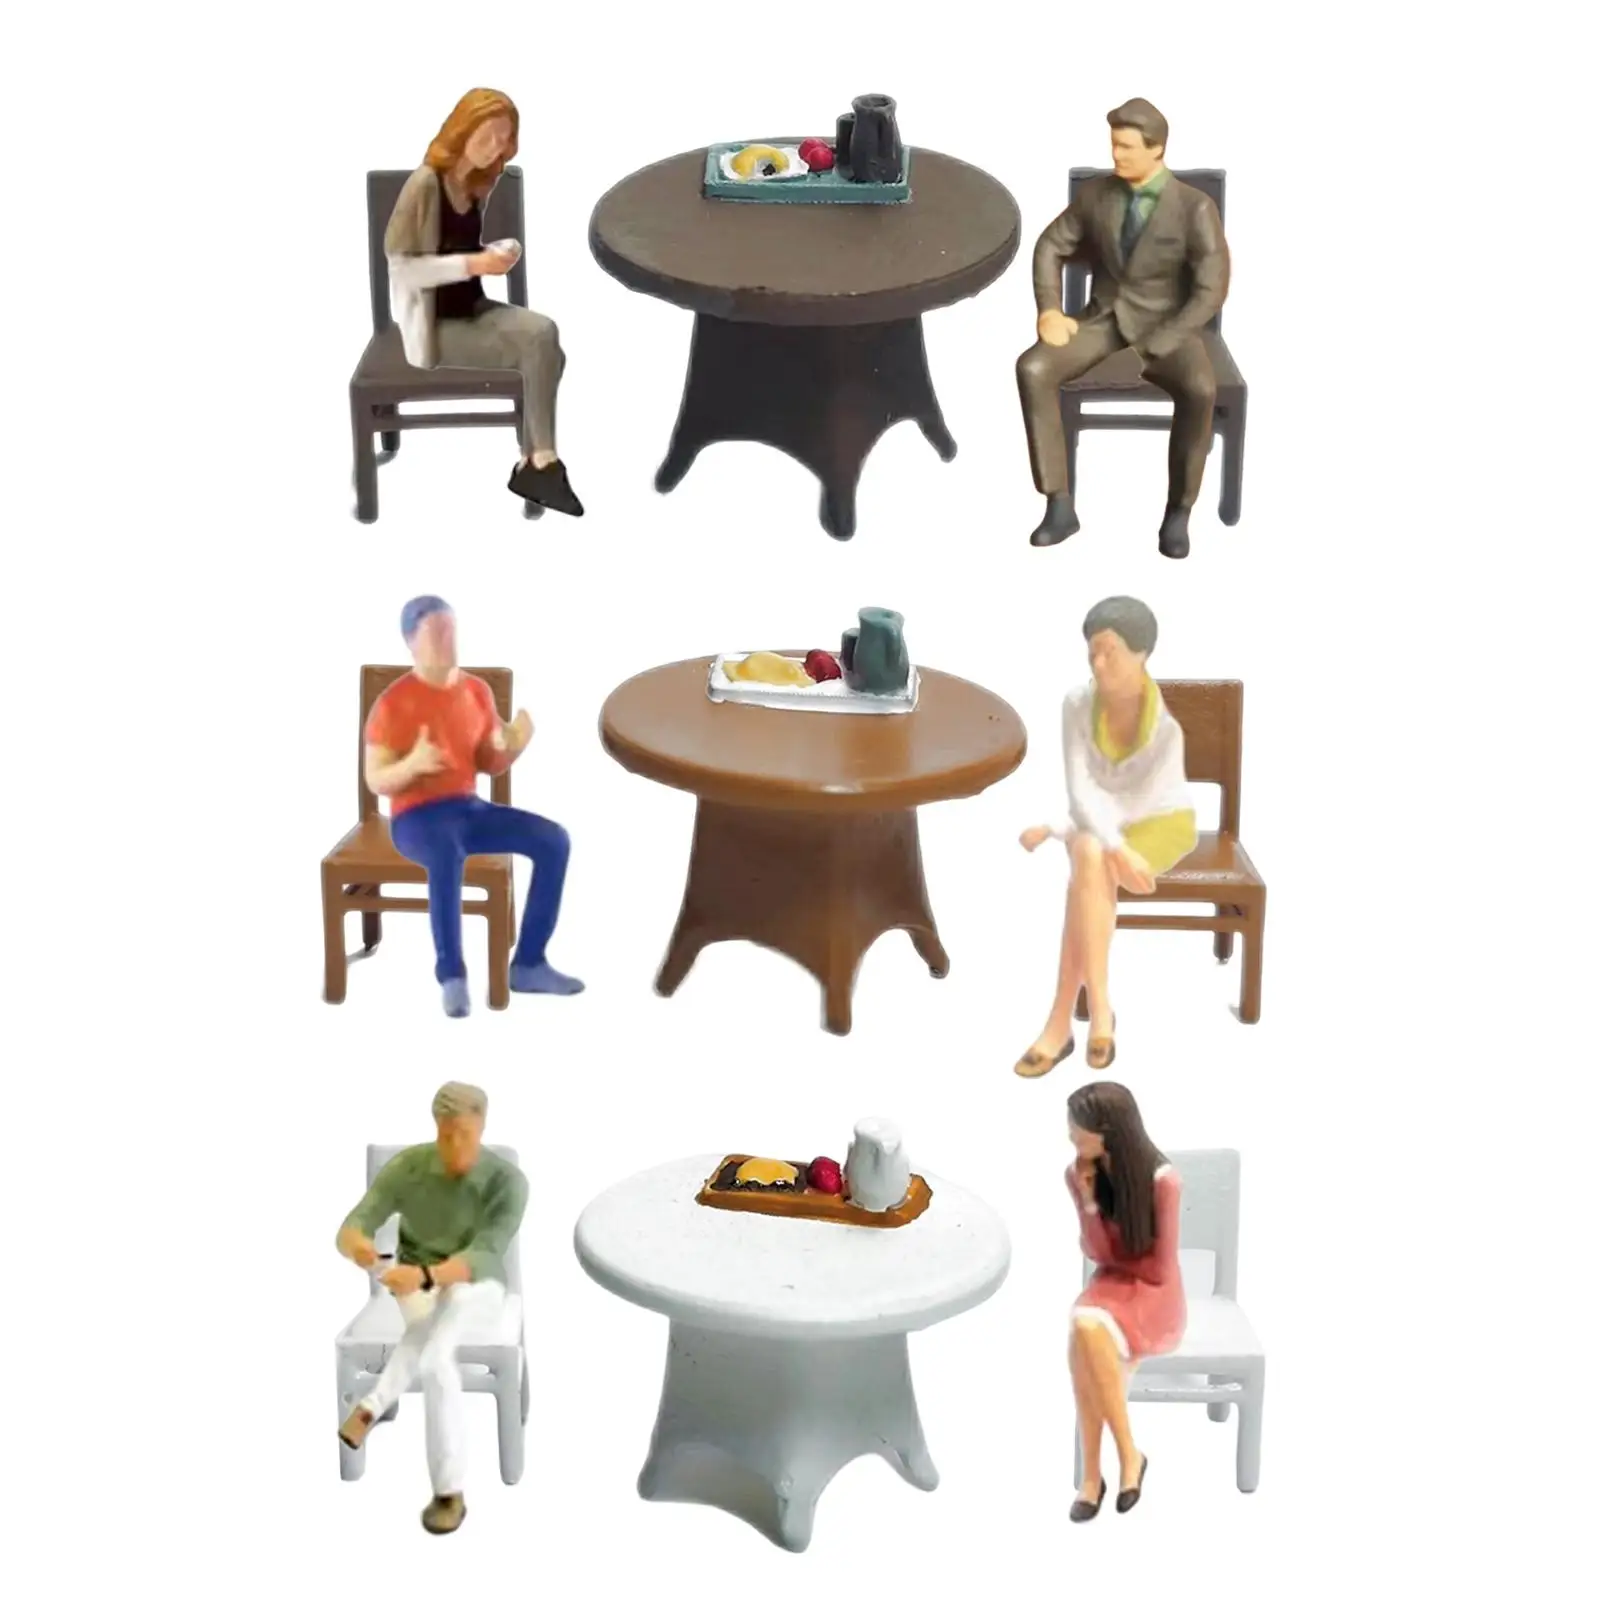 1:64 Model Figures Realistic Dining Room Scenes Character Figure for Photography Props Dollhouse Diorama Miniature Scene Decor